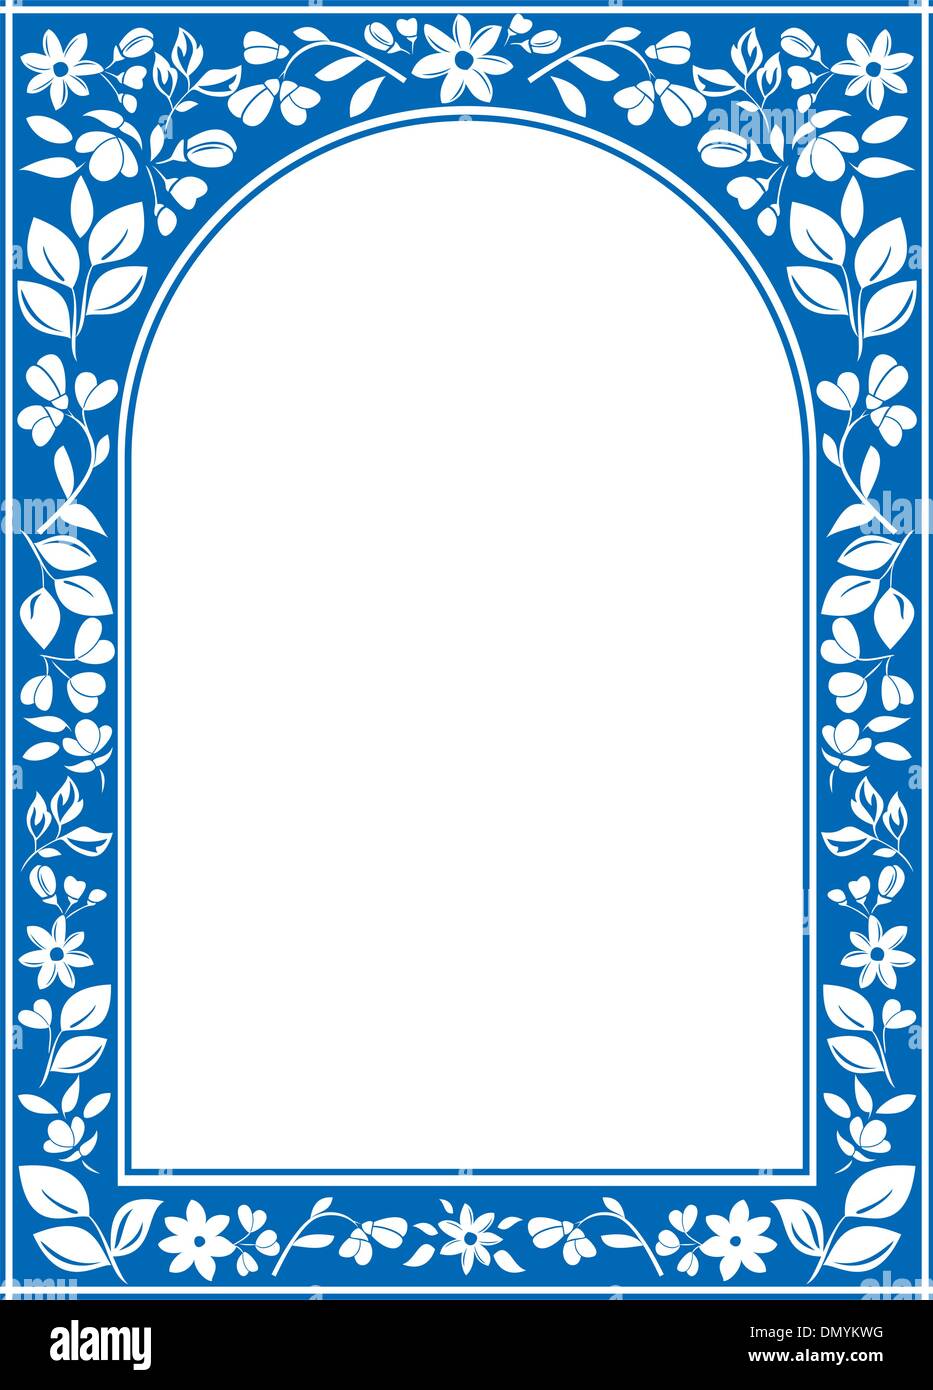 vector blue floral arch frame with white center Stock Vector